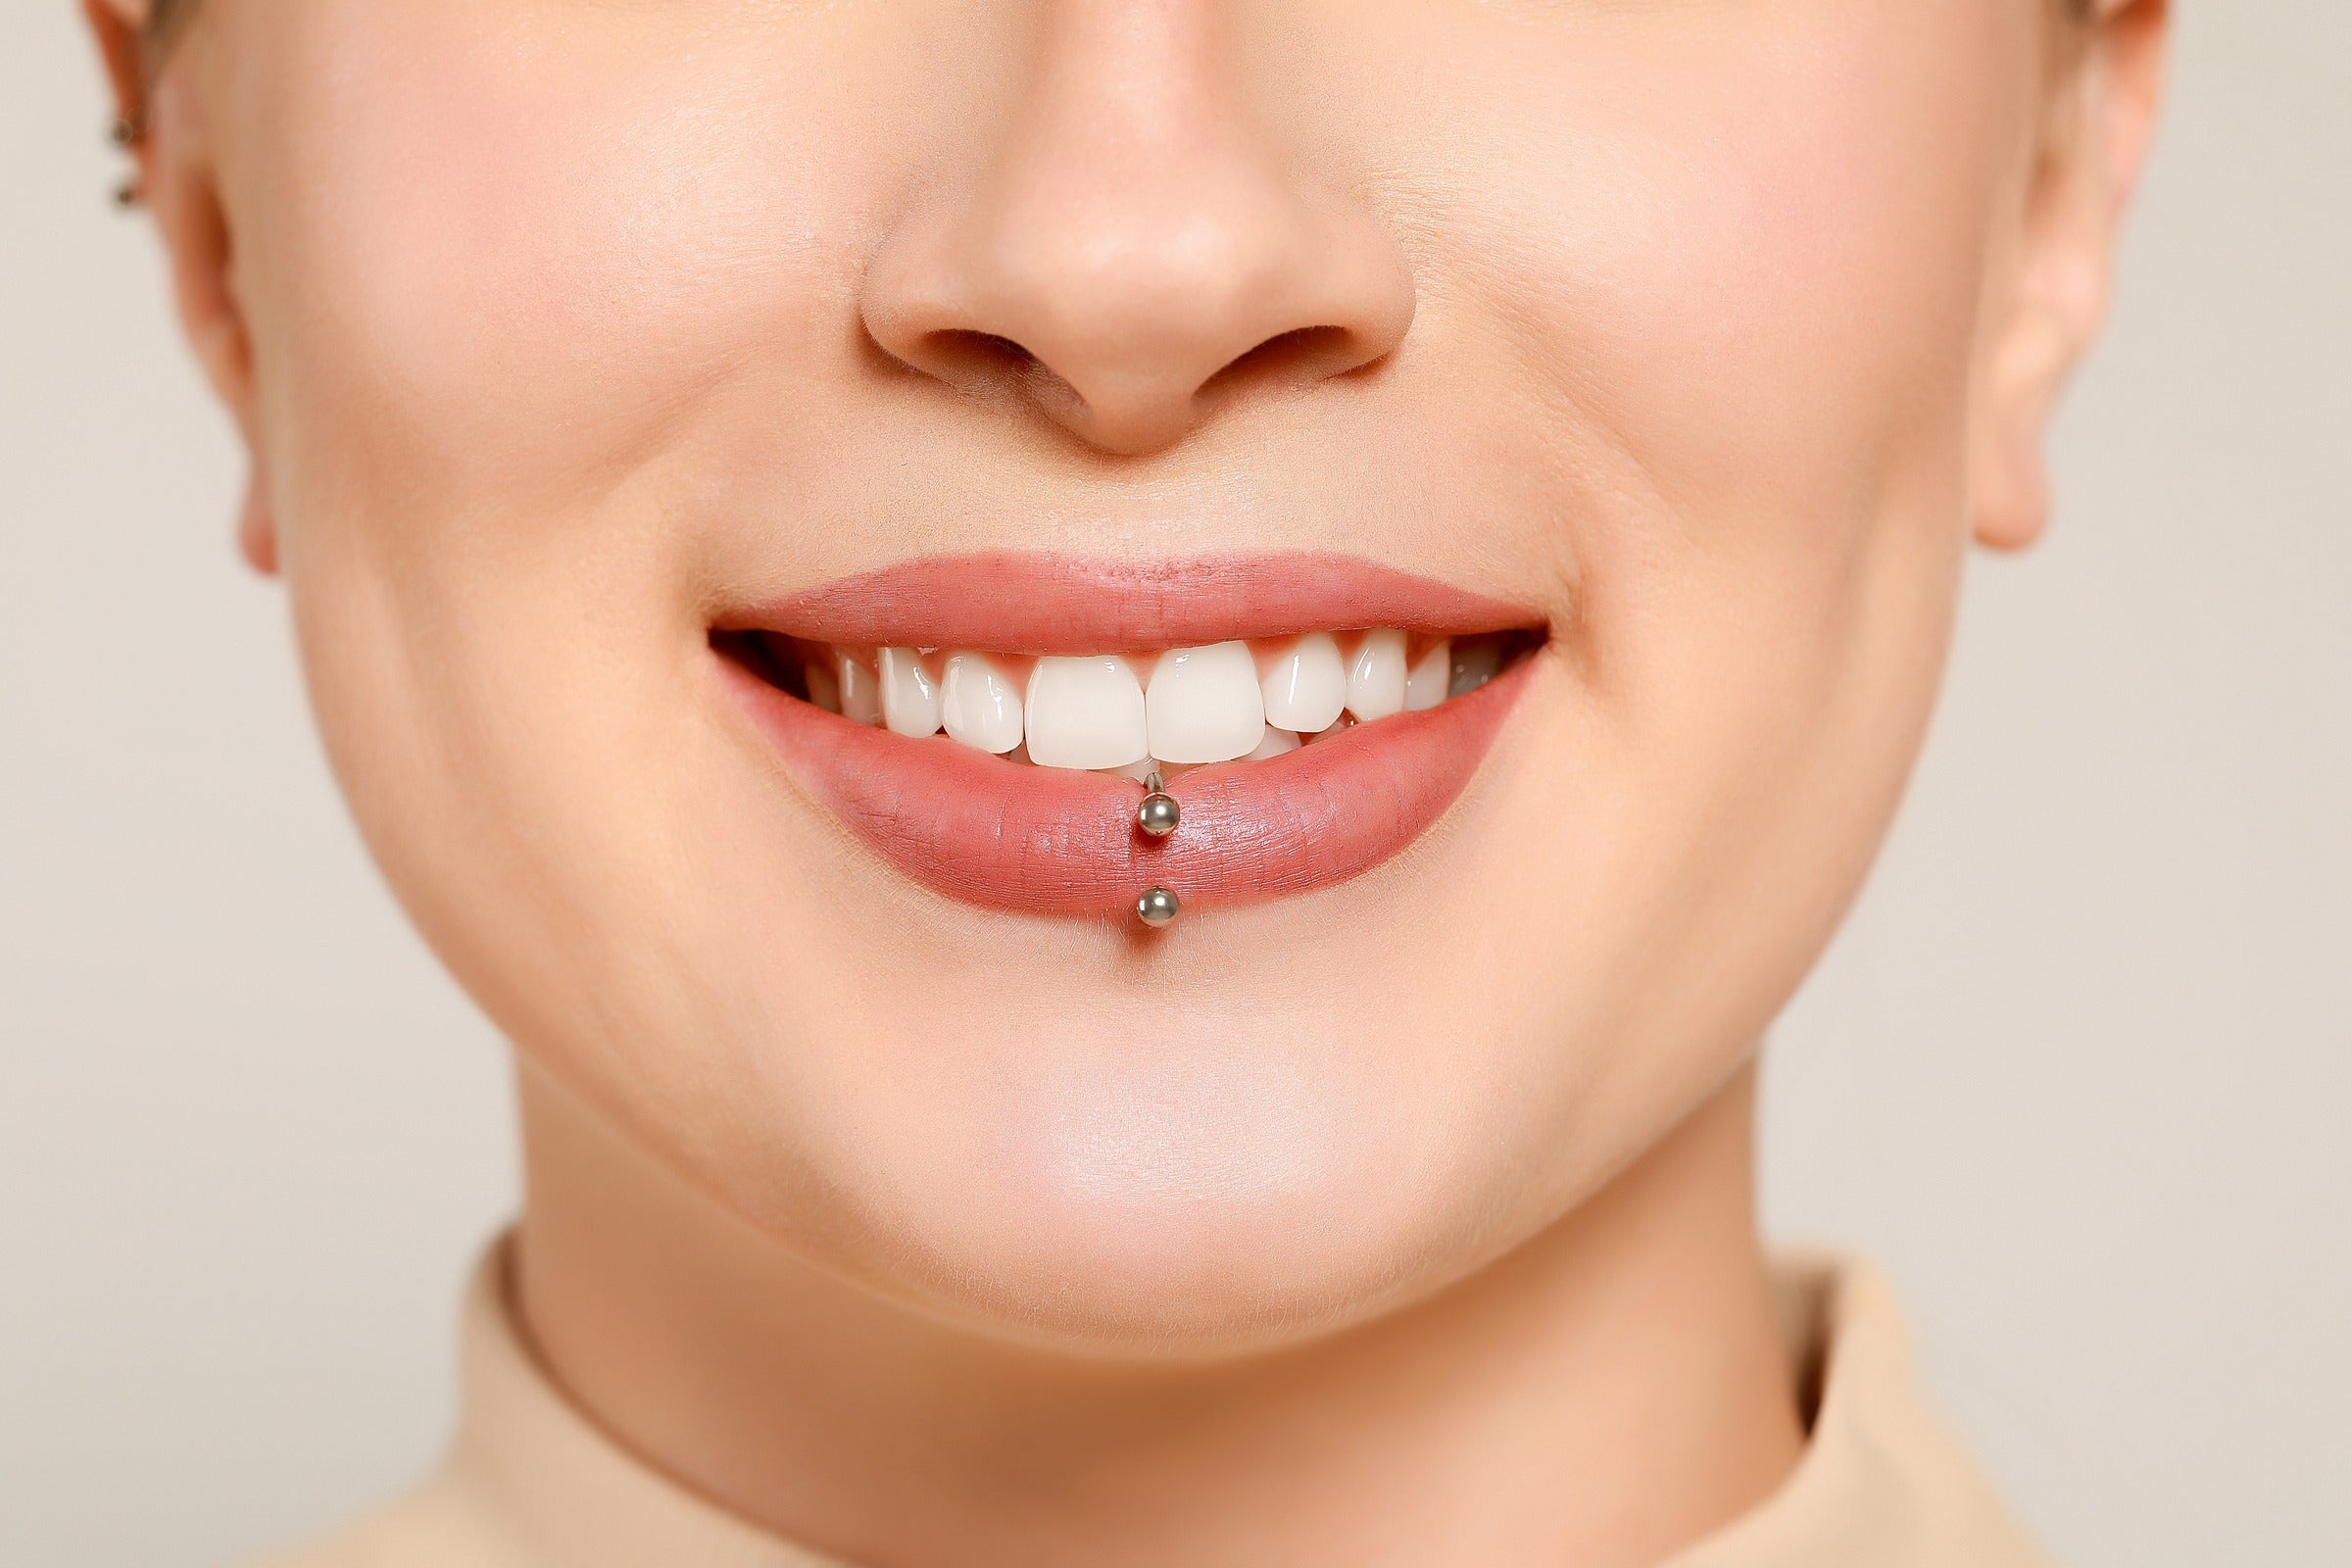 Symptoms and Aftercare Strategies for Lip Piercing Infections